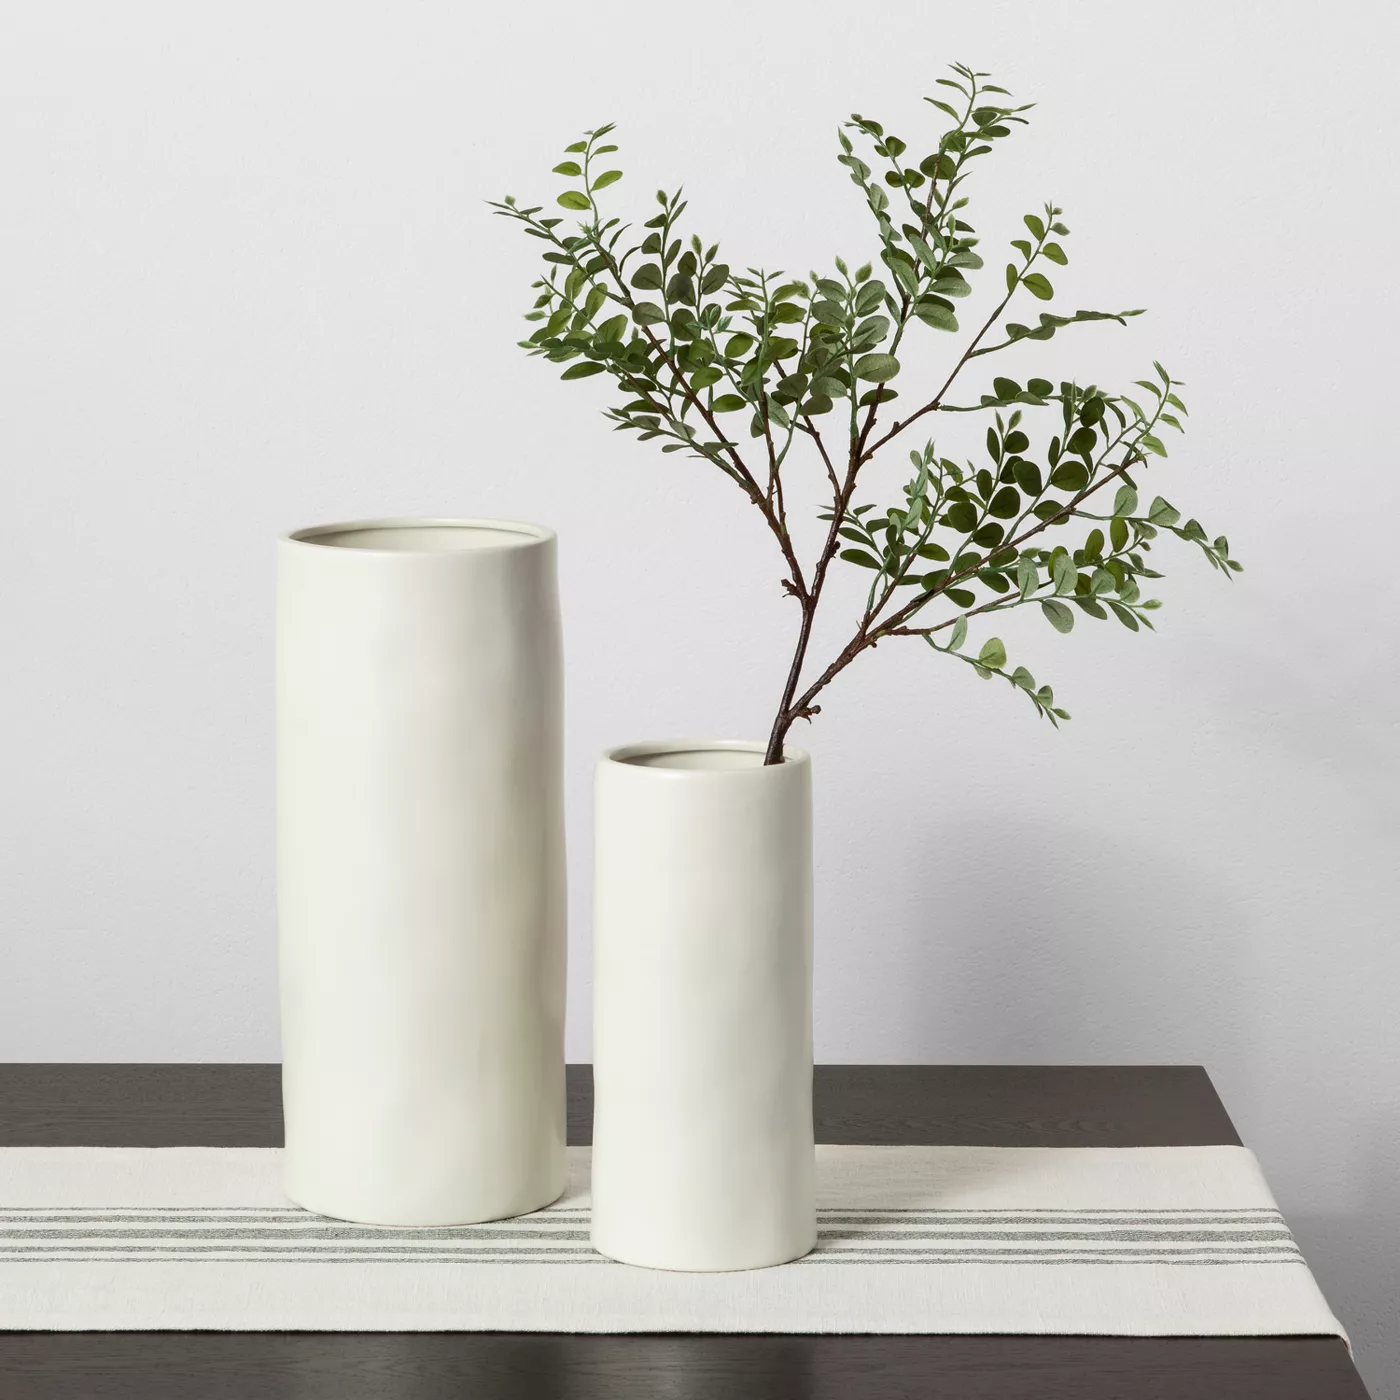 Vase White - Hearth & Hand™ with Magnolia - image 2 of 7